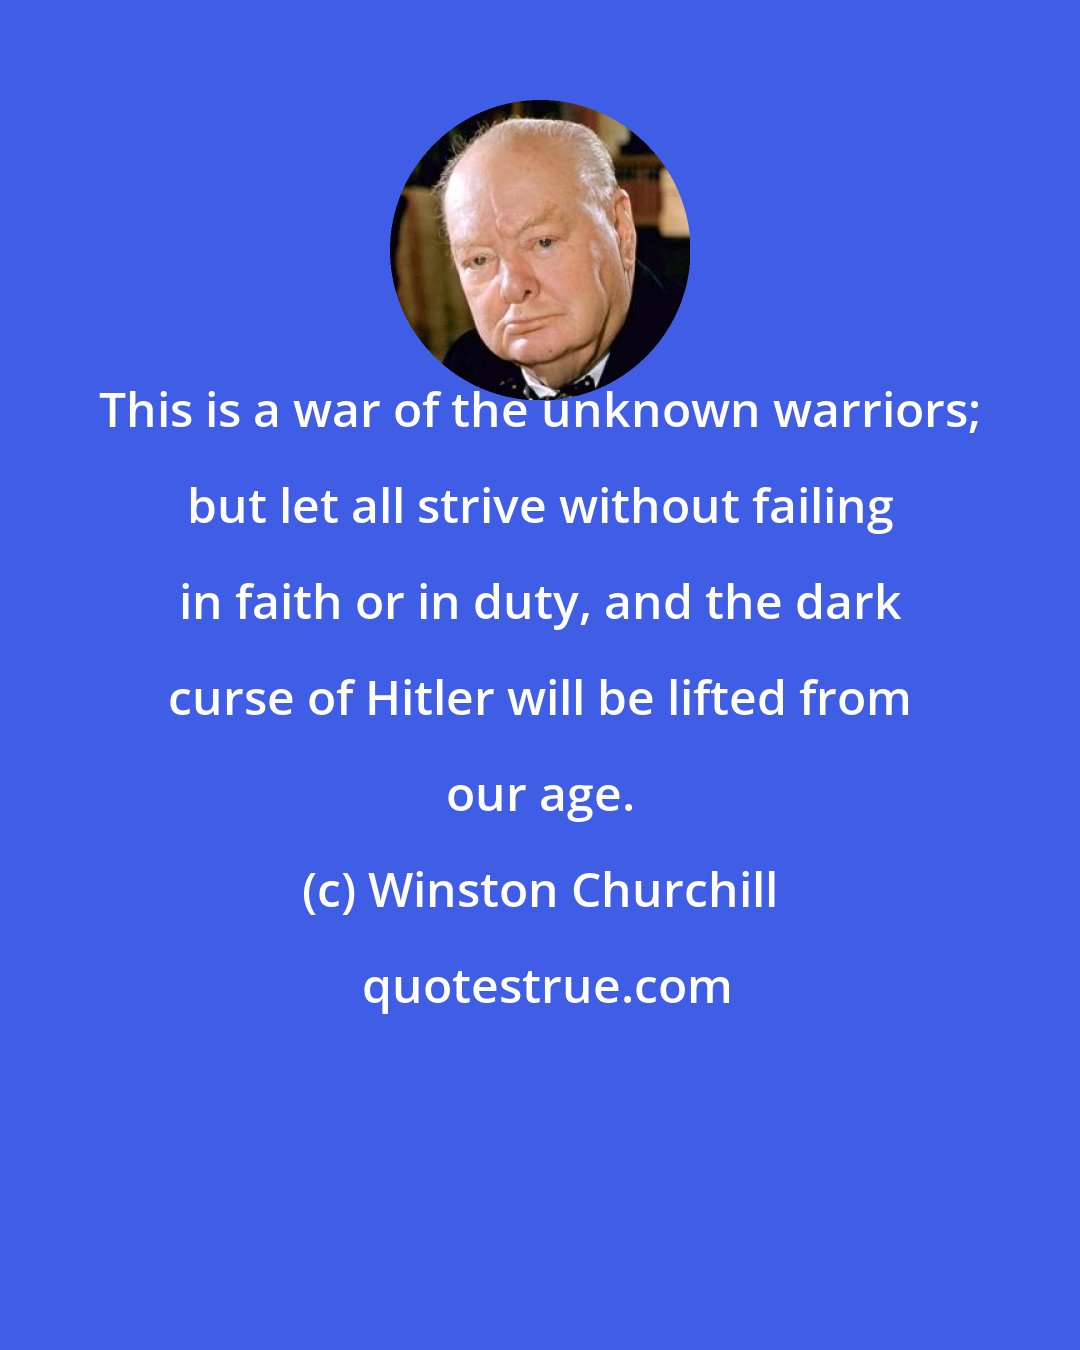 Winston Churchill: This is a war of the unknown warriors; but let all strive without failing in faith or in duty, and the dark curse of Hitler will be lifted from our age.